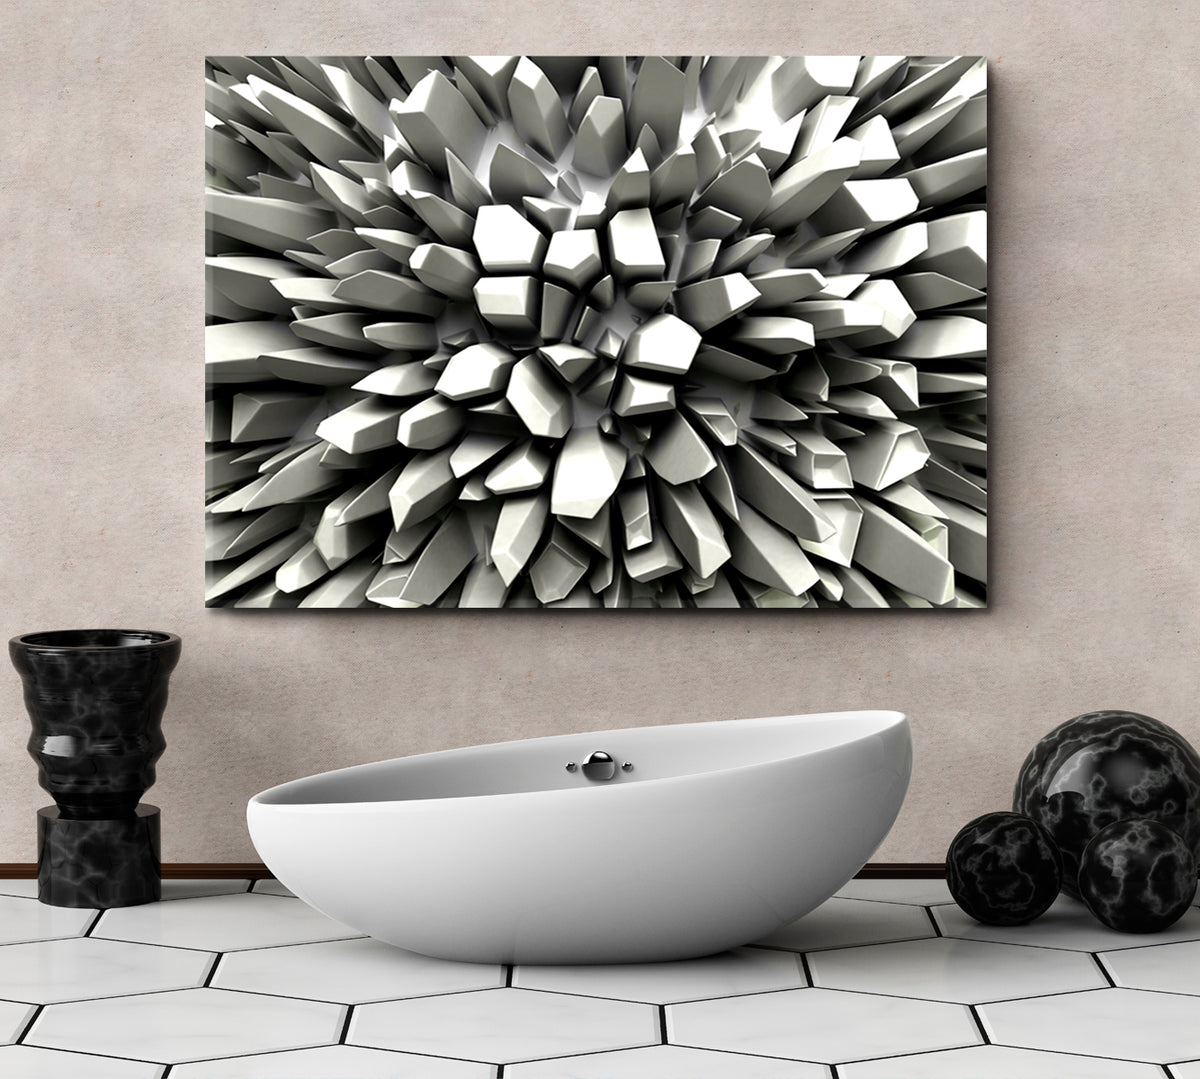 Abstract Three-dimension Crystallized Rays 3D Effect Shapes Poster Abstract Art Print Artesty 1 panel 24" x 16" 